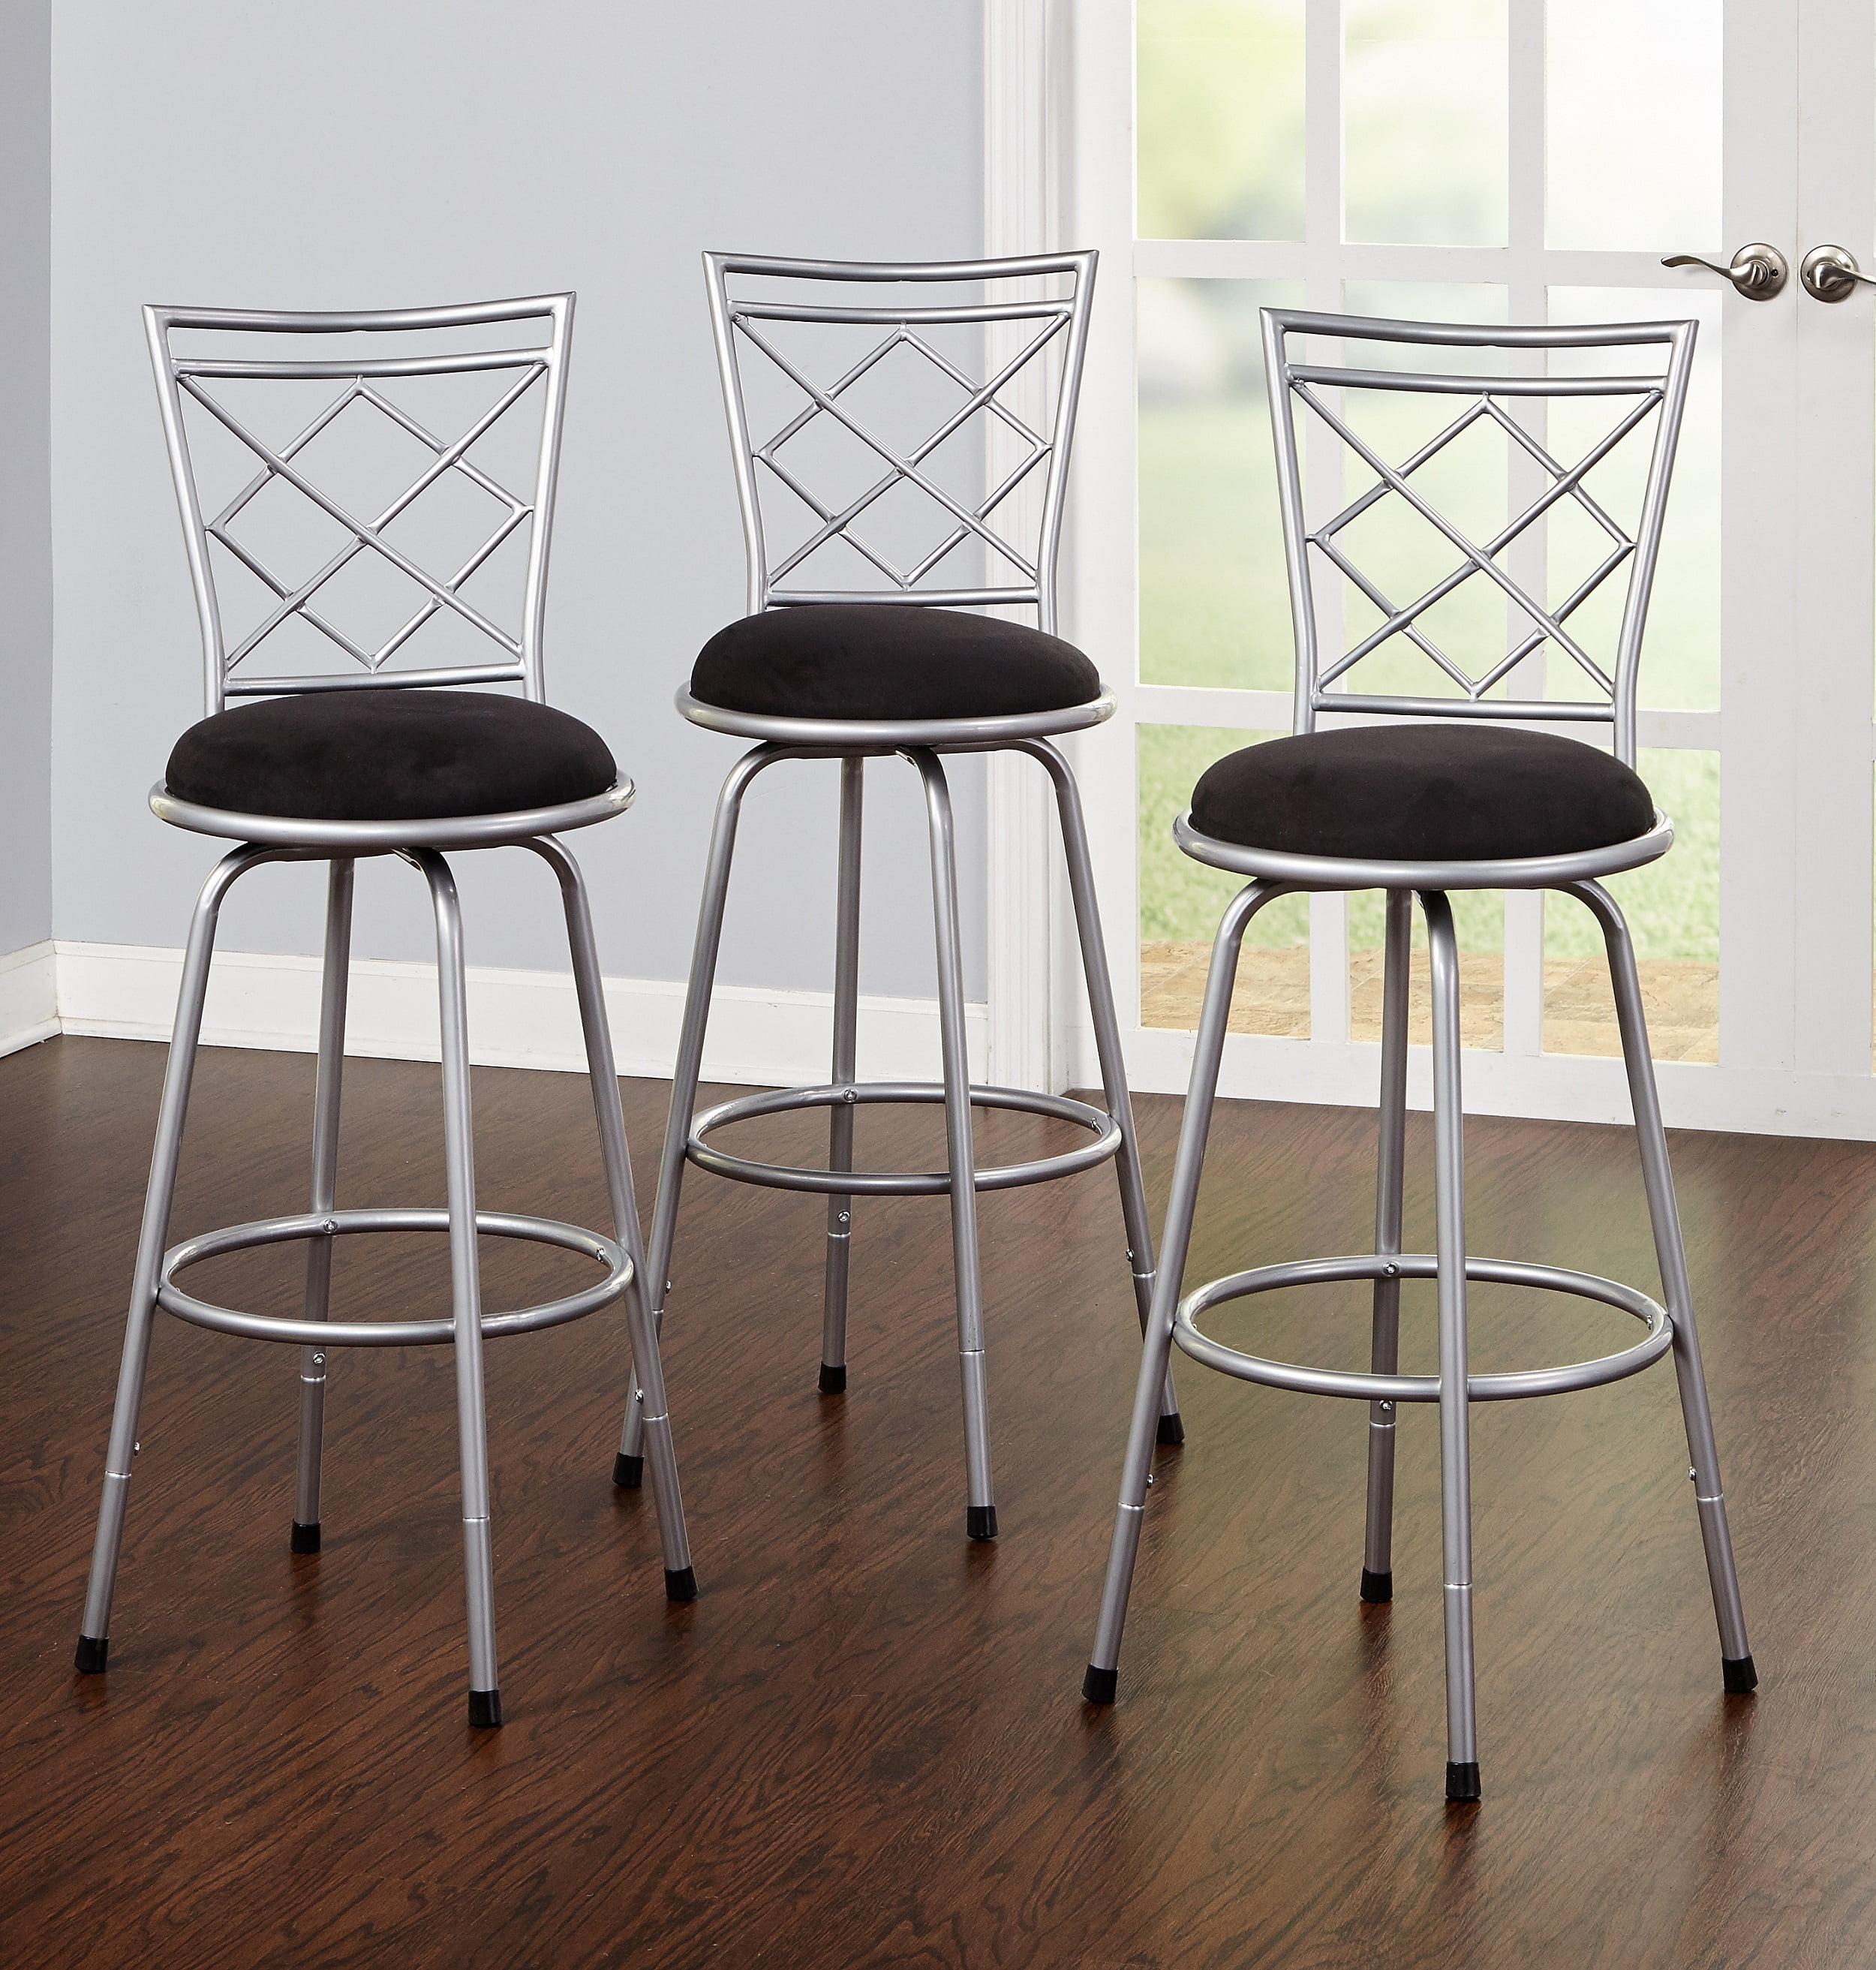 Bar Stools Set Of High Seat Chairs Adjustable Swivel Kitchen Counter